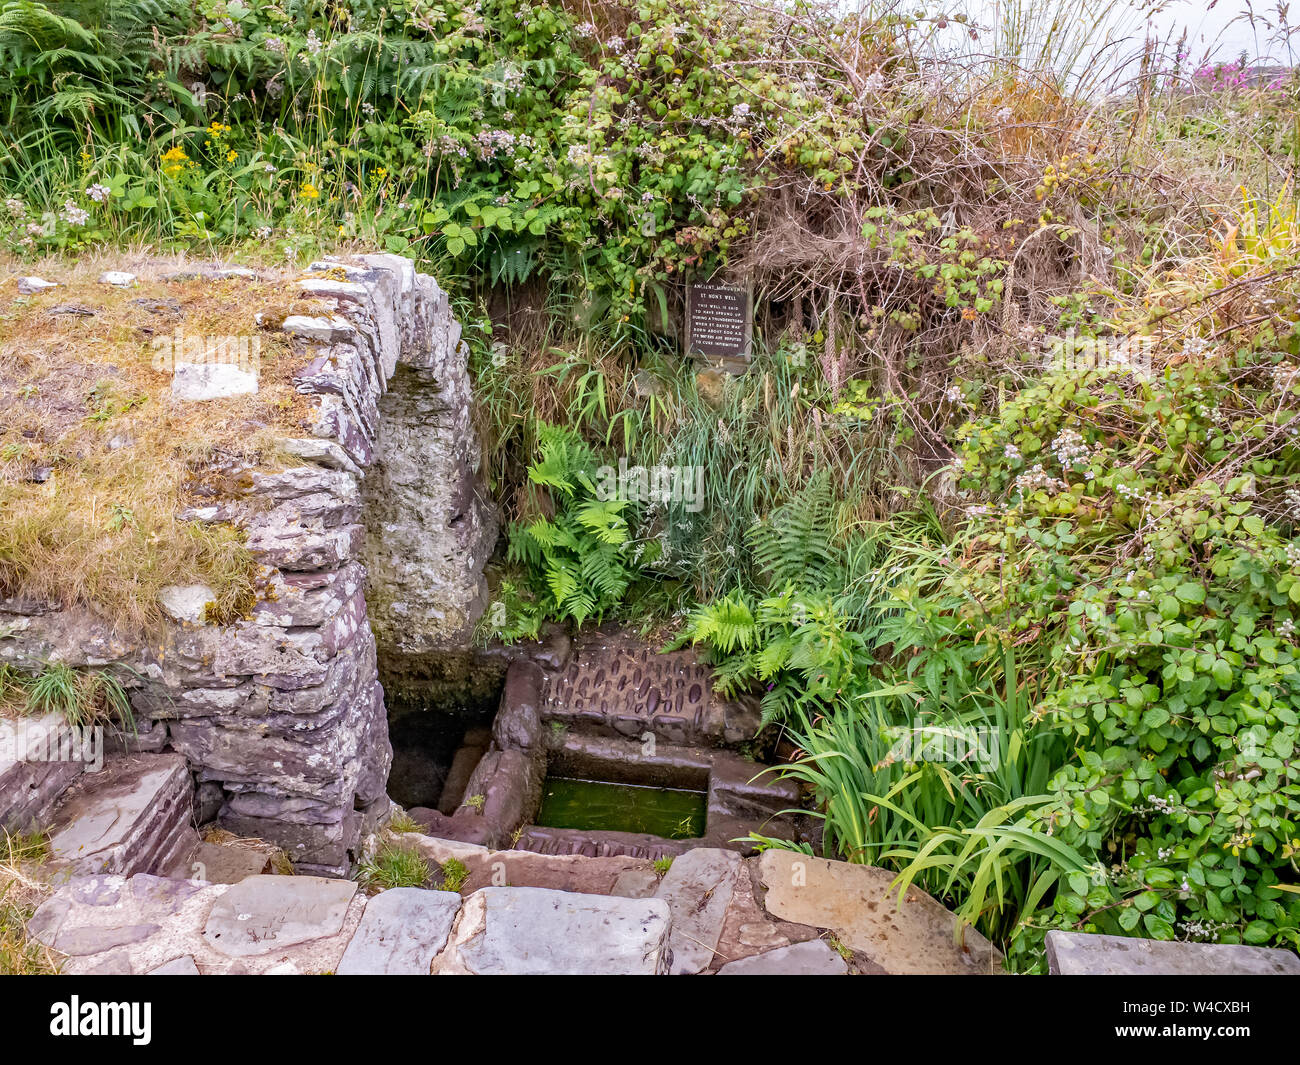 St Non’s Well: An historic and ancient well with healing qualities St Non’s Chapel, St Non’s Bay on the Welsh coastal path, South Wales Stock Photo